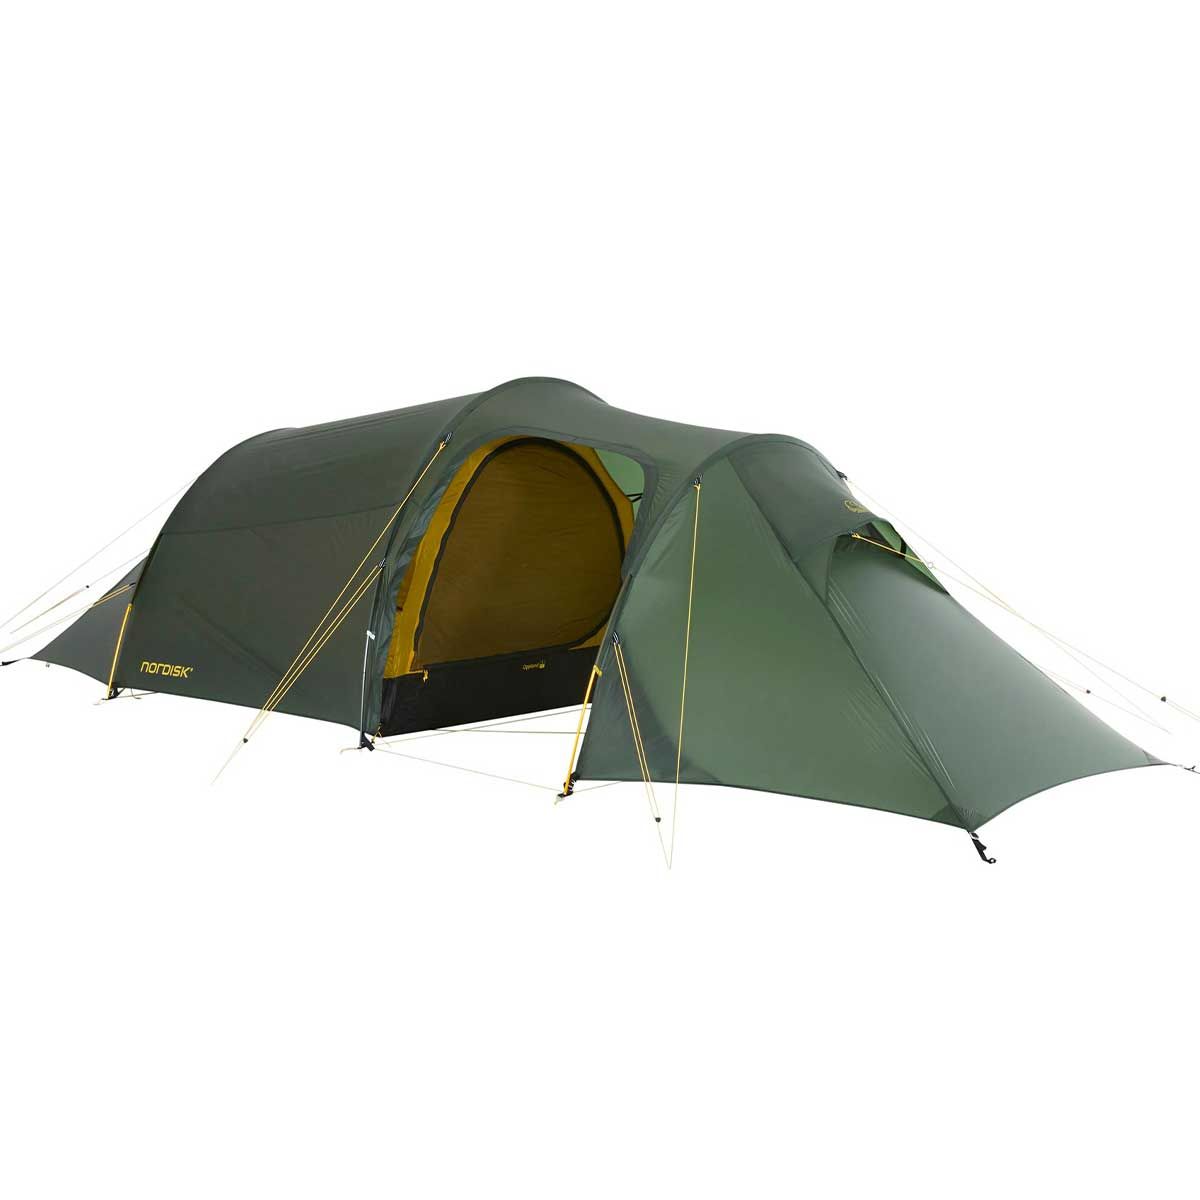 Tente Nordisk Oppland 2 LW - 2 personnes